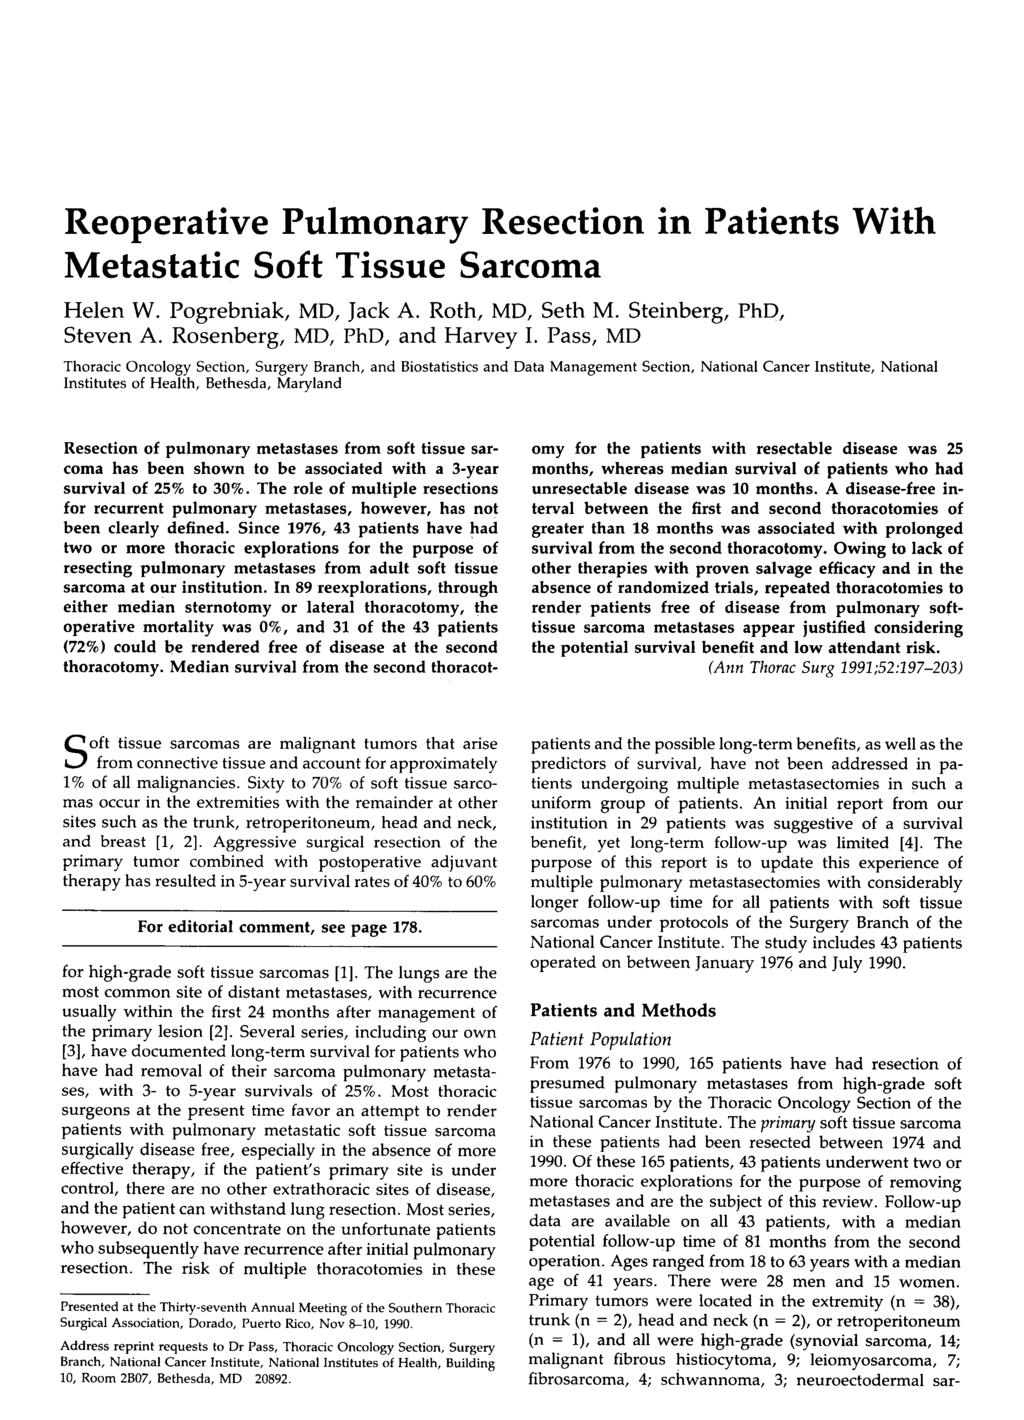 Reoperative Pulmonary Resection in Patients With Metastatic Soft Tissue Sarcoma Helen W. Pogrebniak, MD, Jack A. Roth, MD, Seth M. Steinberg, PhD, Steven A. Rosenberg, MD, PhD, and Harvey I.